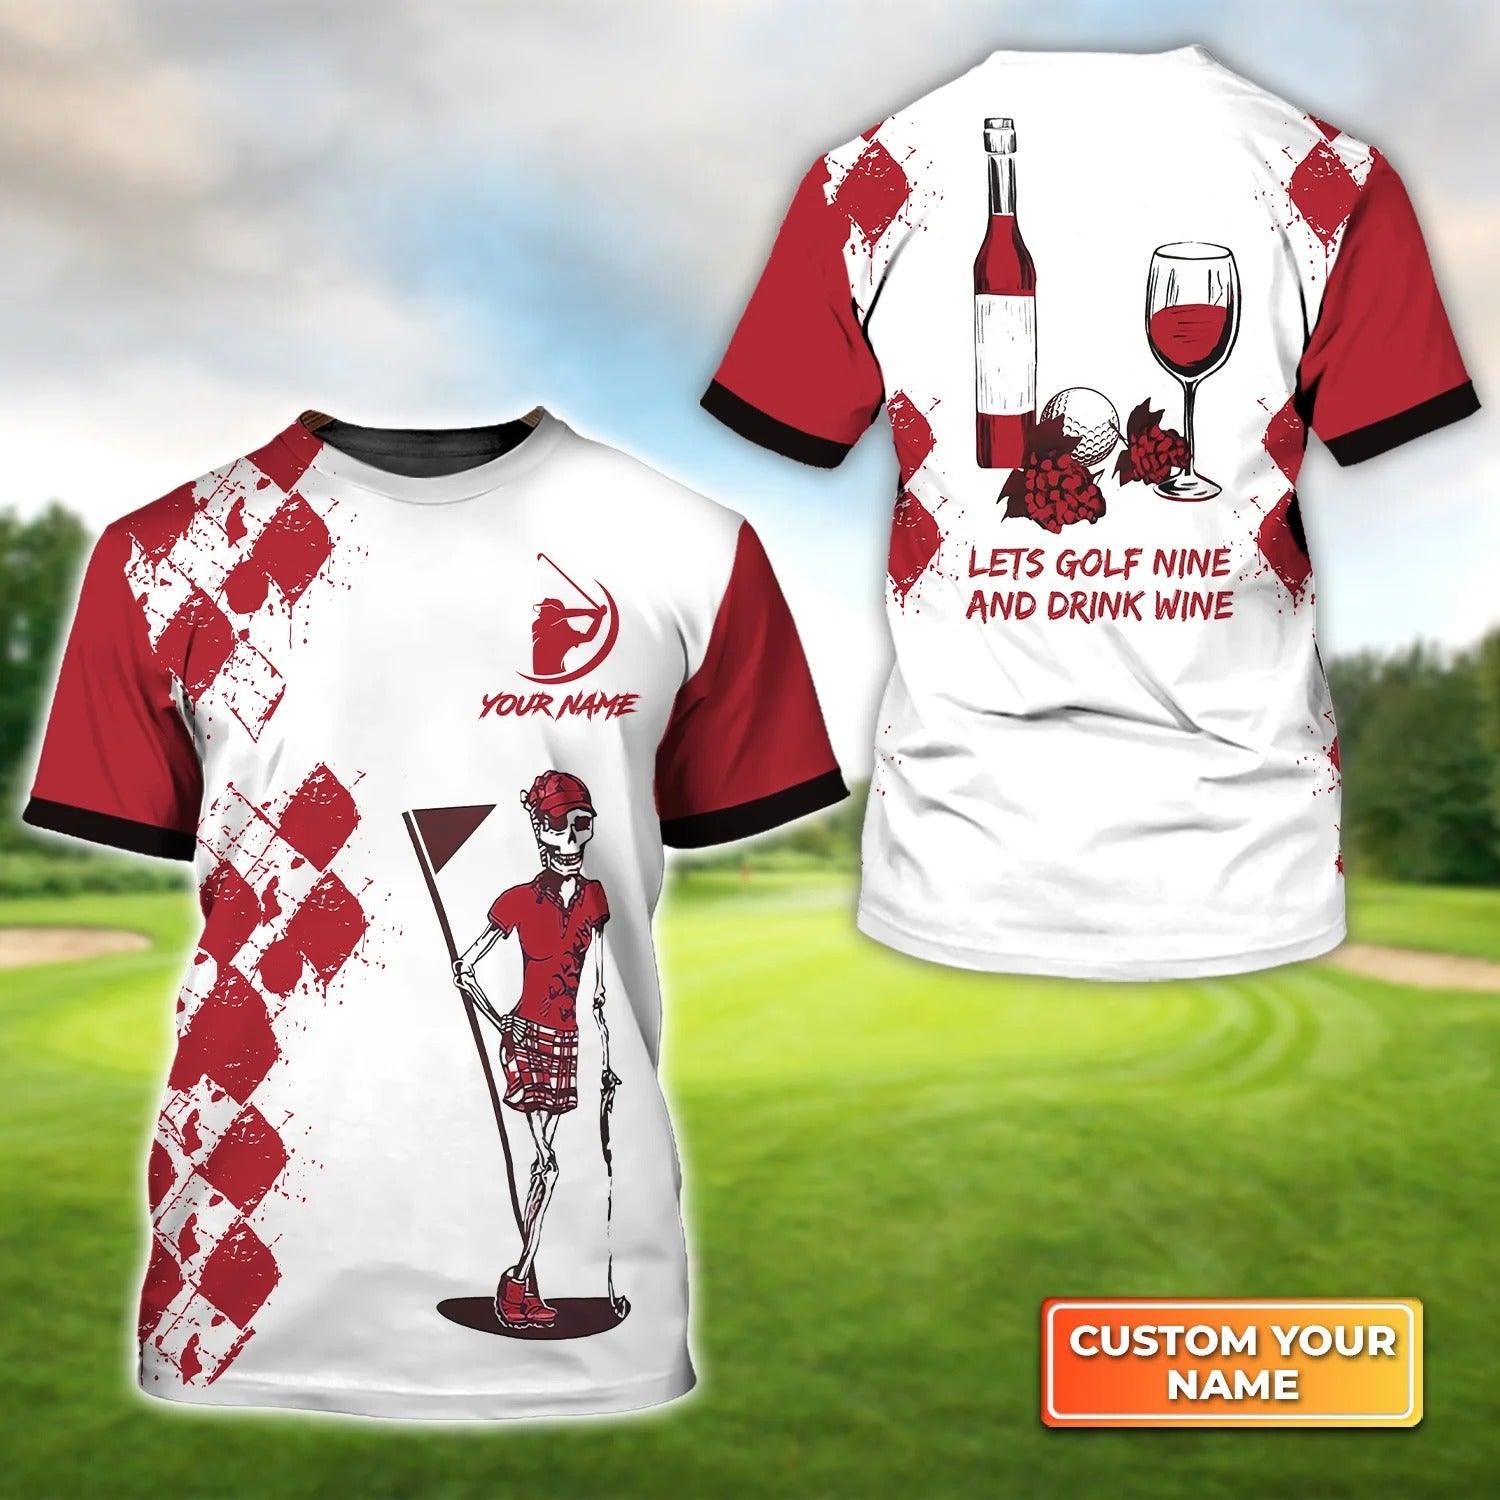 Customized Golf T Shirt, Personalized Name Argyle Pattern Golf Nine And Drink Wine T Shirt For Golf Lovers - Perfect Gift For Golfer, Friend, Family - Amzanimalsgift